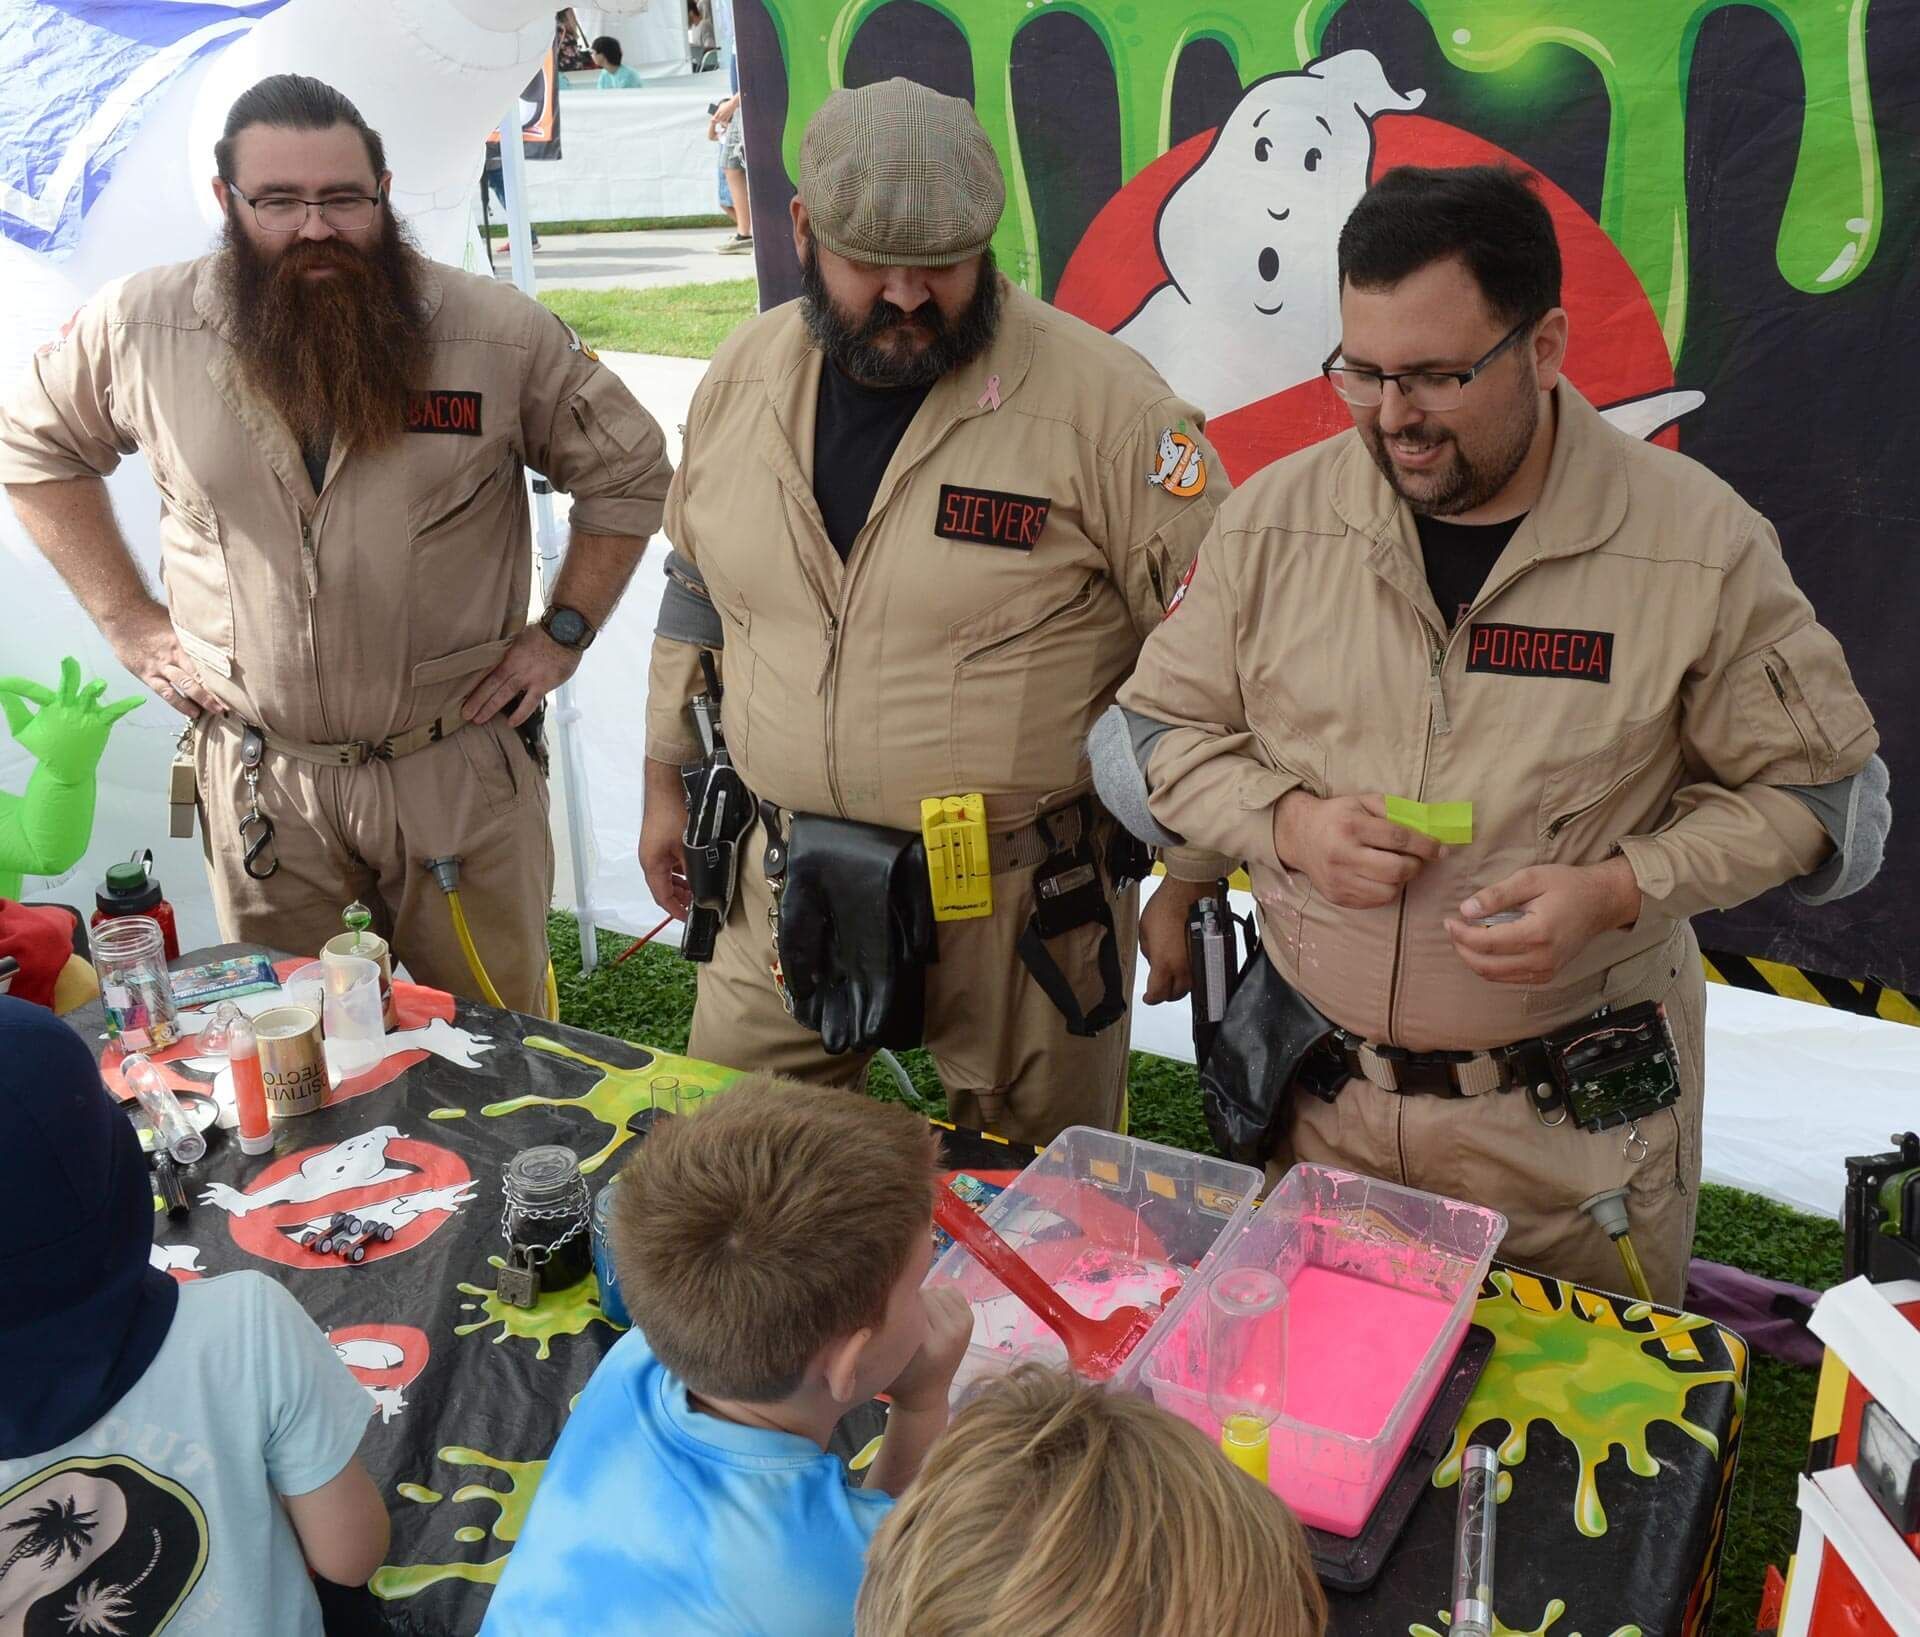 Three characters in Ghostbusters costumes interacting with young participants at an activity table.